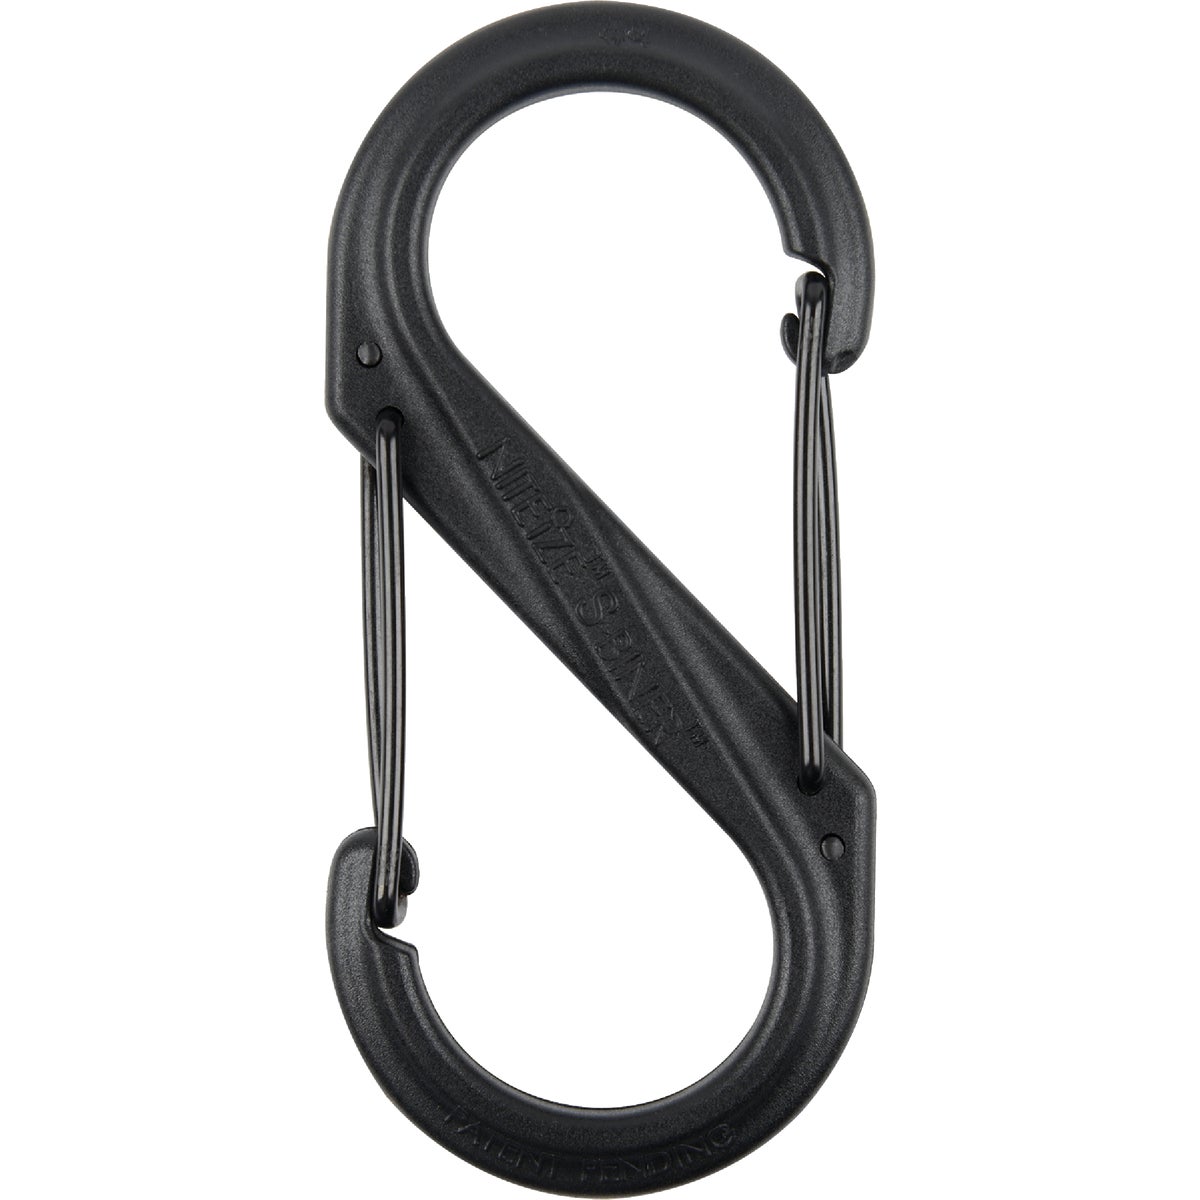 Item 767521, Double-gated carabiner featuring dual spring gates.